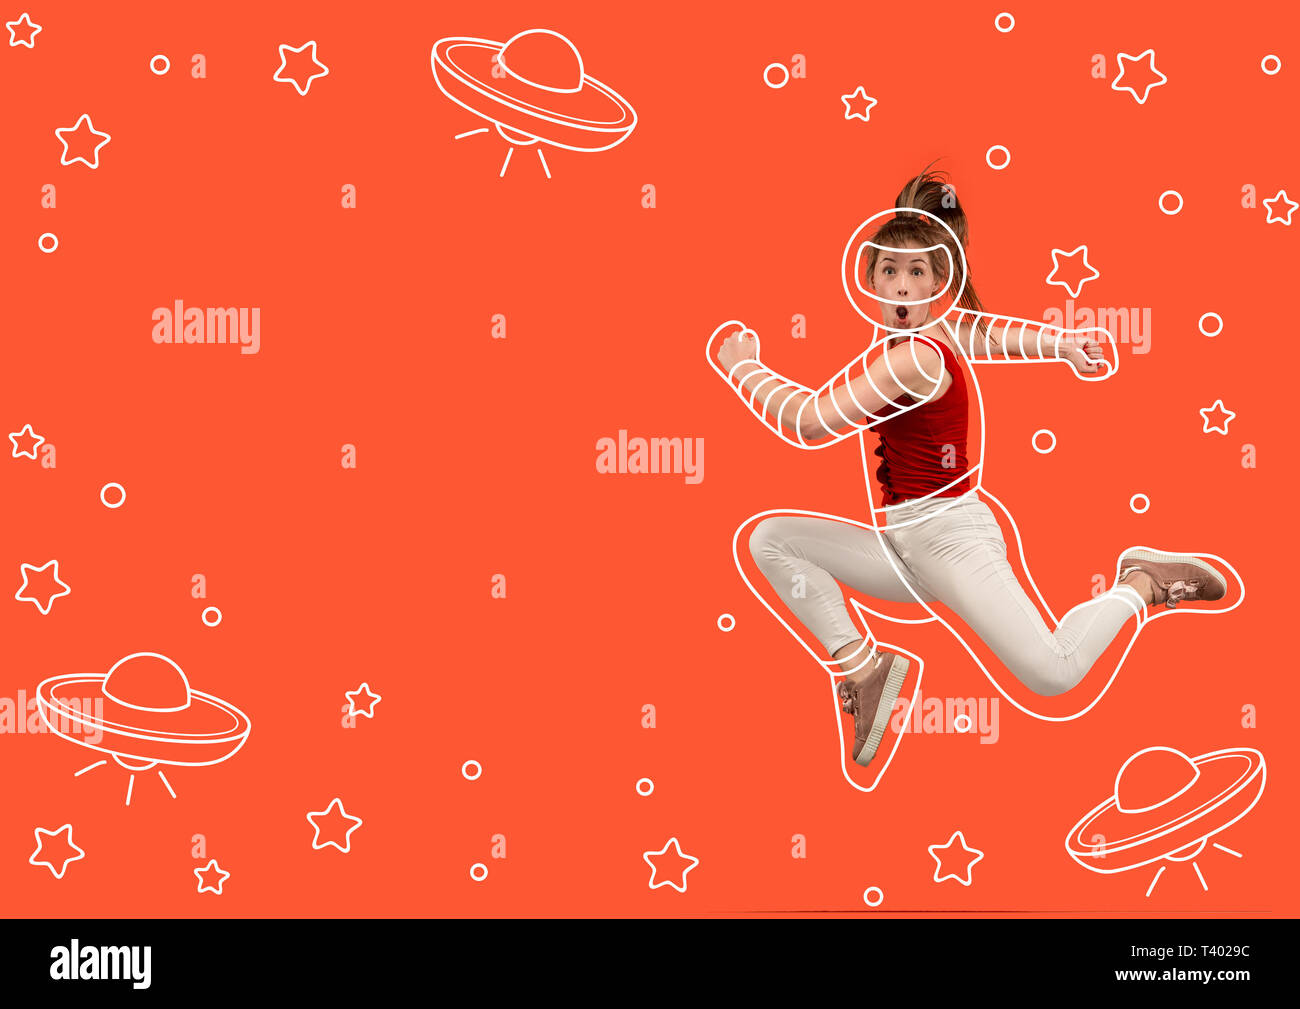 Running right to the stars. Dreaming about cosmonaut profession or travel the cosmos. Young woman in drawing imaginary spacesuit against bright red background. Concept of dreams. Negative space. Stock Photo